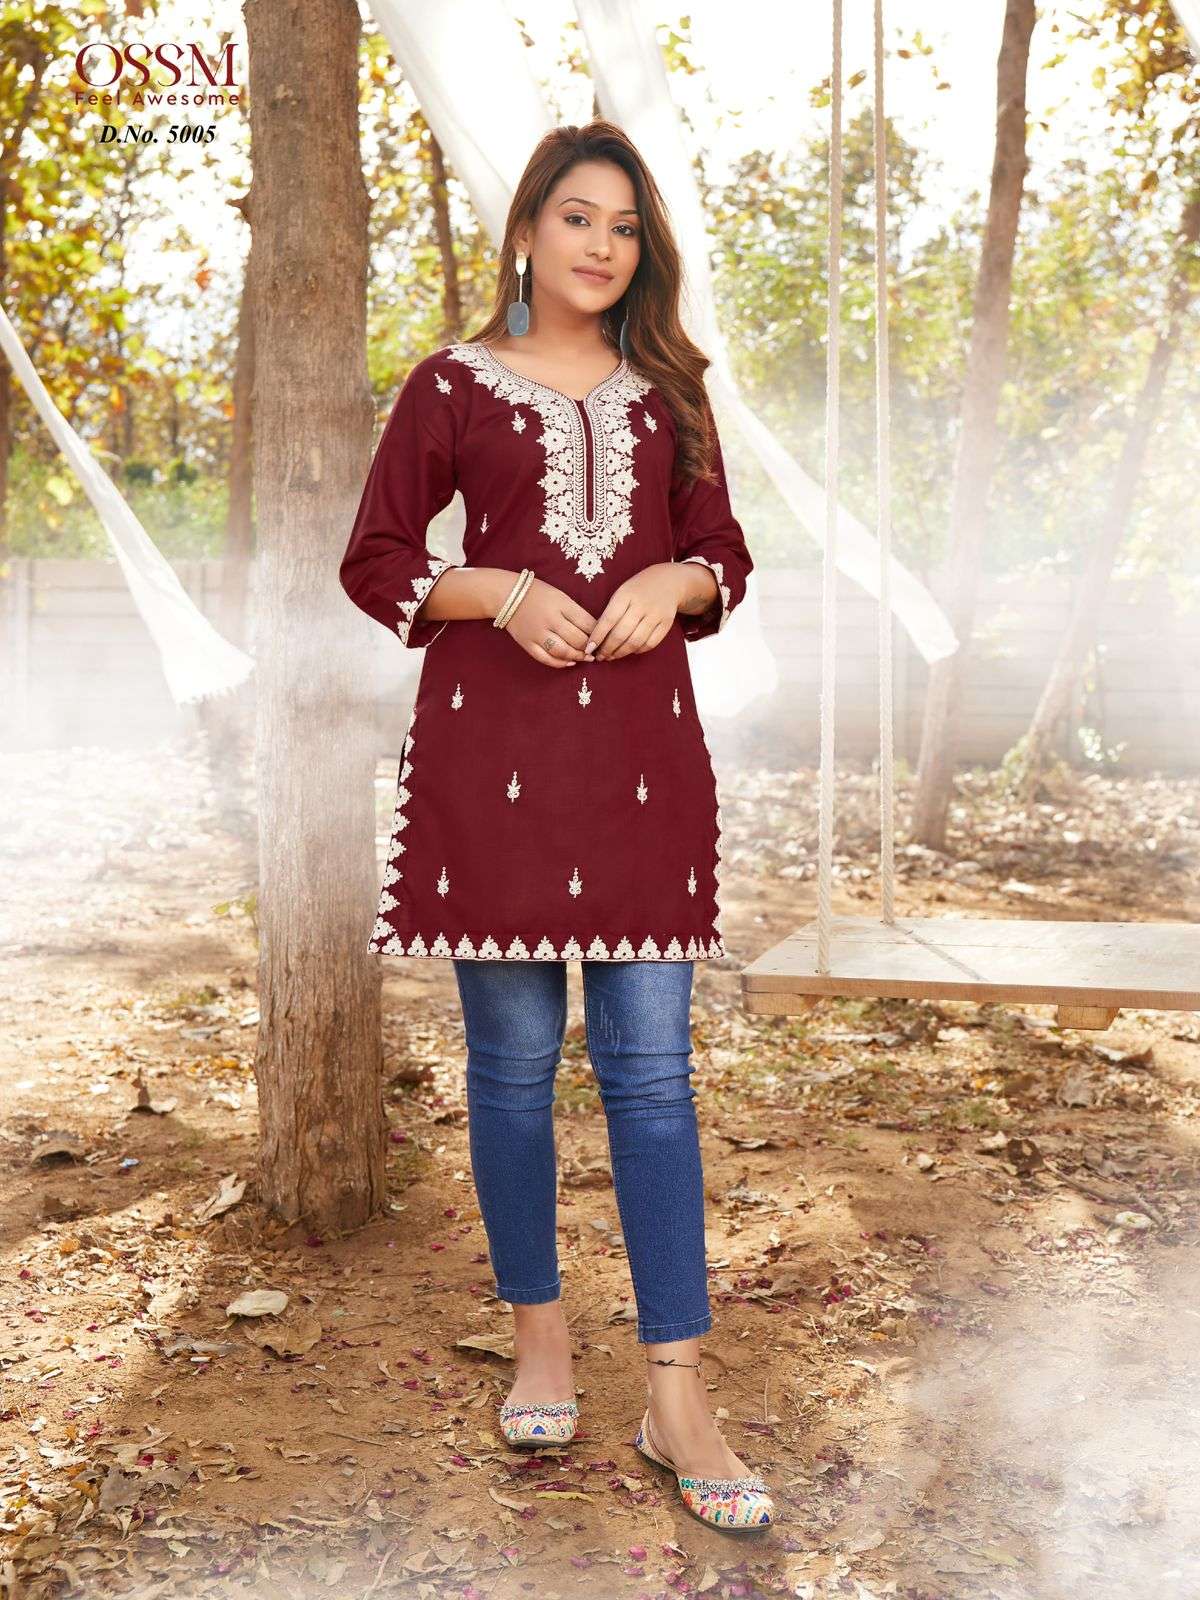 NORA VOL 5 BUY TIPS TOPS RAYON WHOLESALE ONLINE LOWEST PRICE TUNIC KURTIS SETS